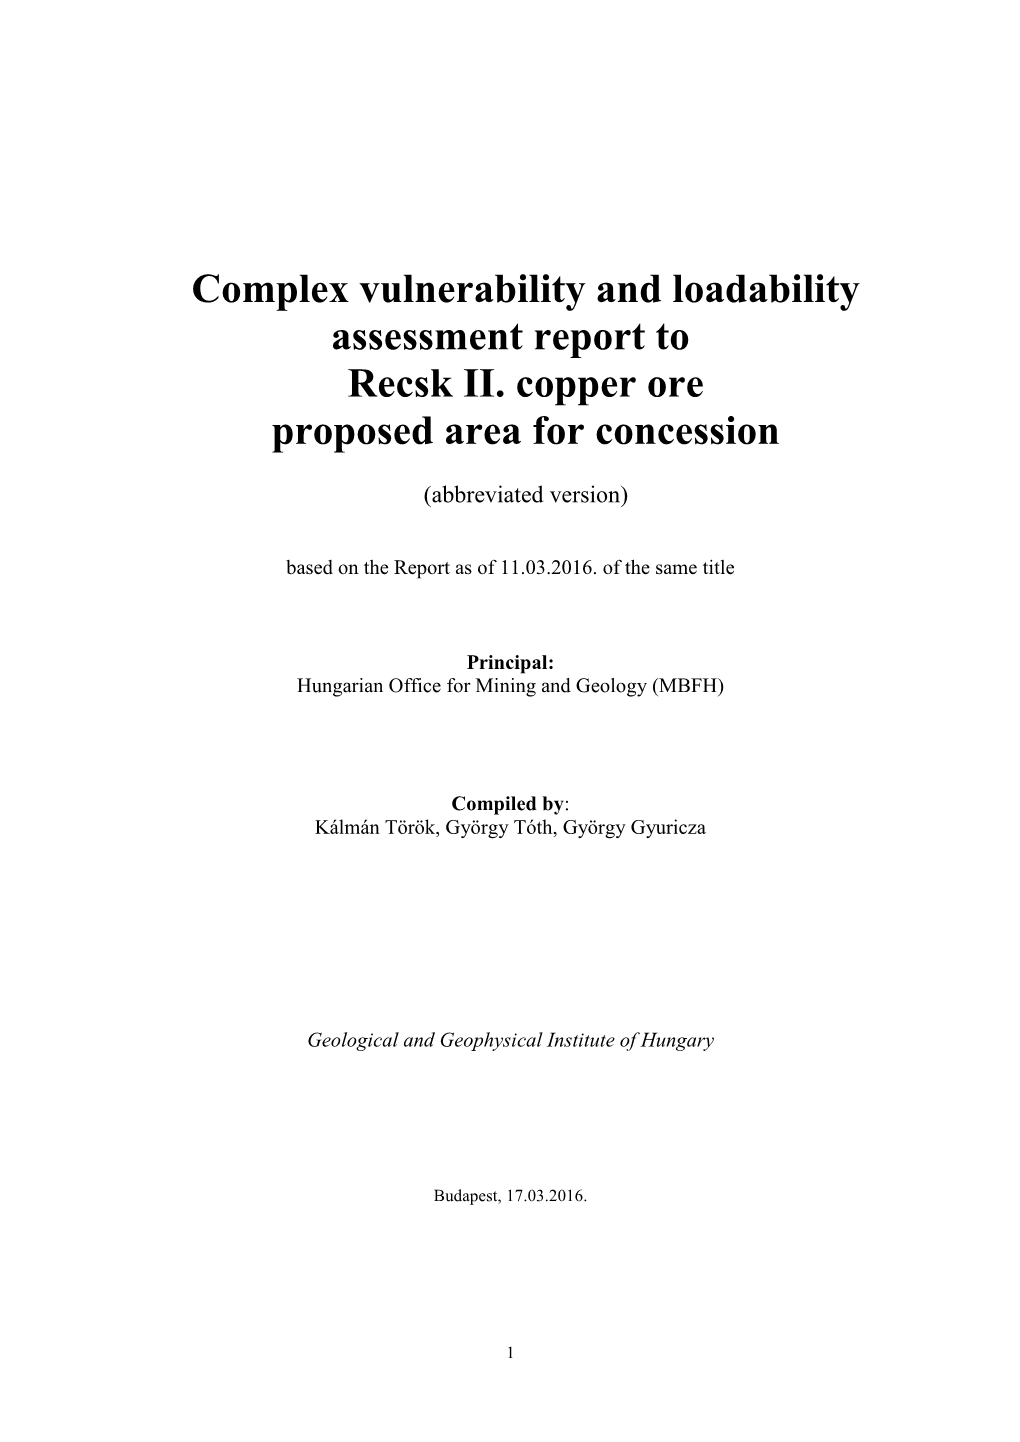 Complex Vulnerability and Loadability Assessment Report to Recsk II. Copper Ore Proposed Area for Concession